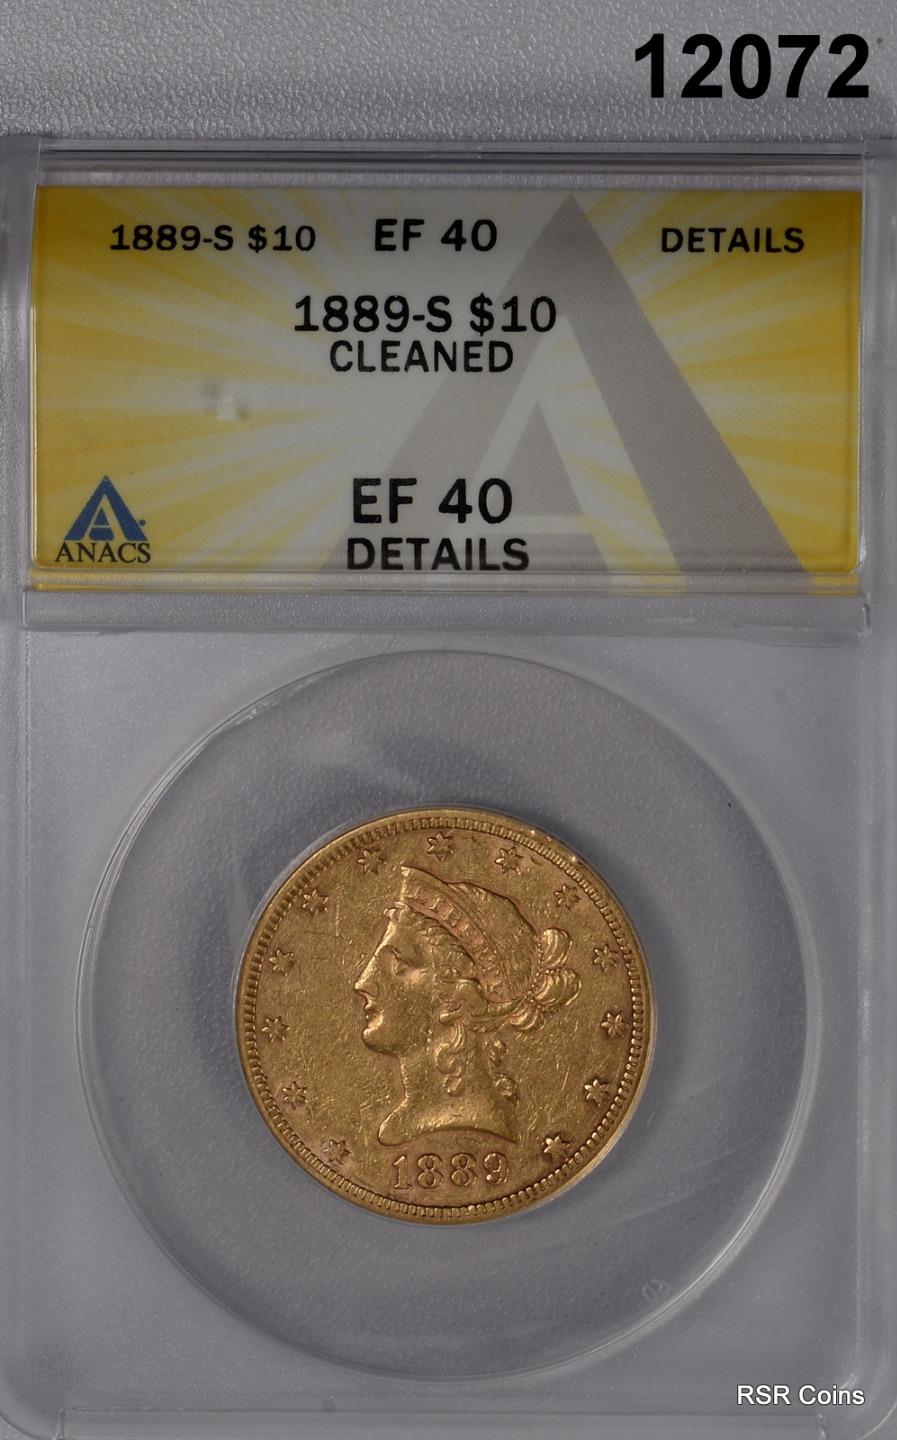 1889 S $10 GOLD LIBERTY ANACS CERTIFIED EF40 CLEANED LOOKS BETTER! #12072